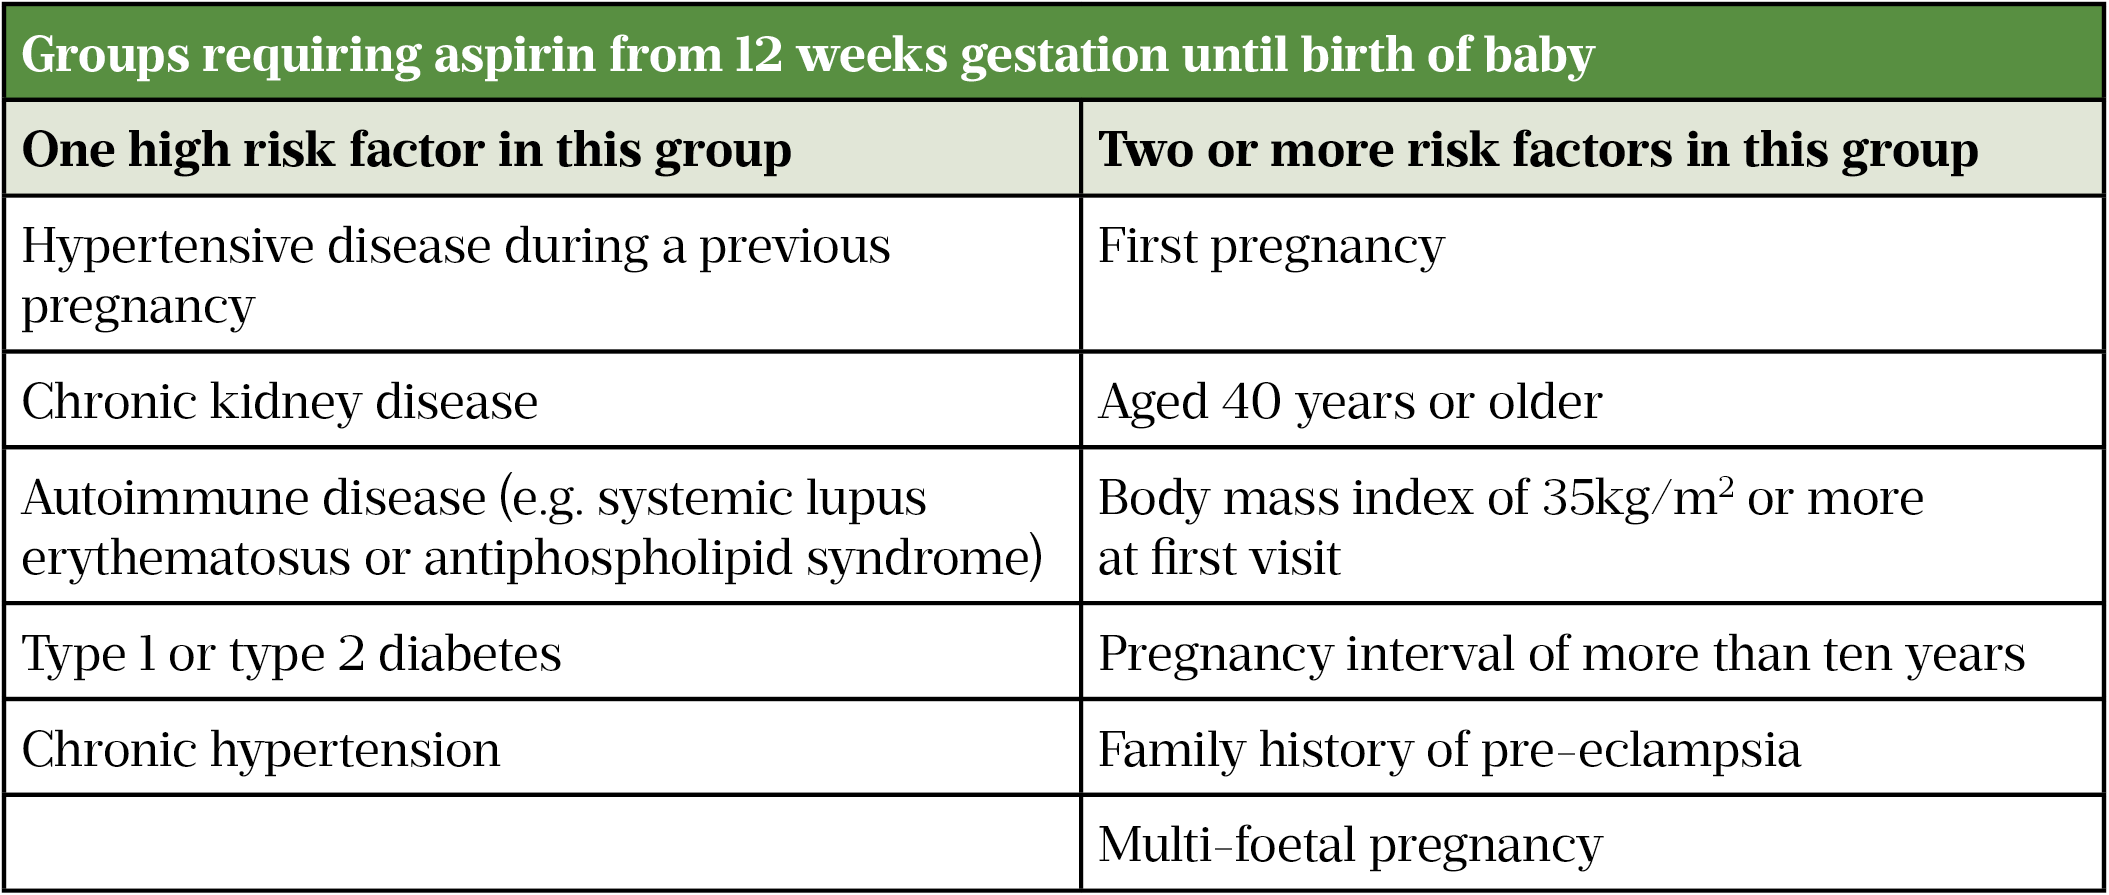 Table 1: Groups requiring aspirin from 12 weeks gestation until birth of baby